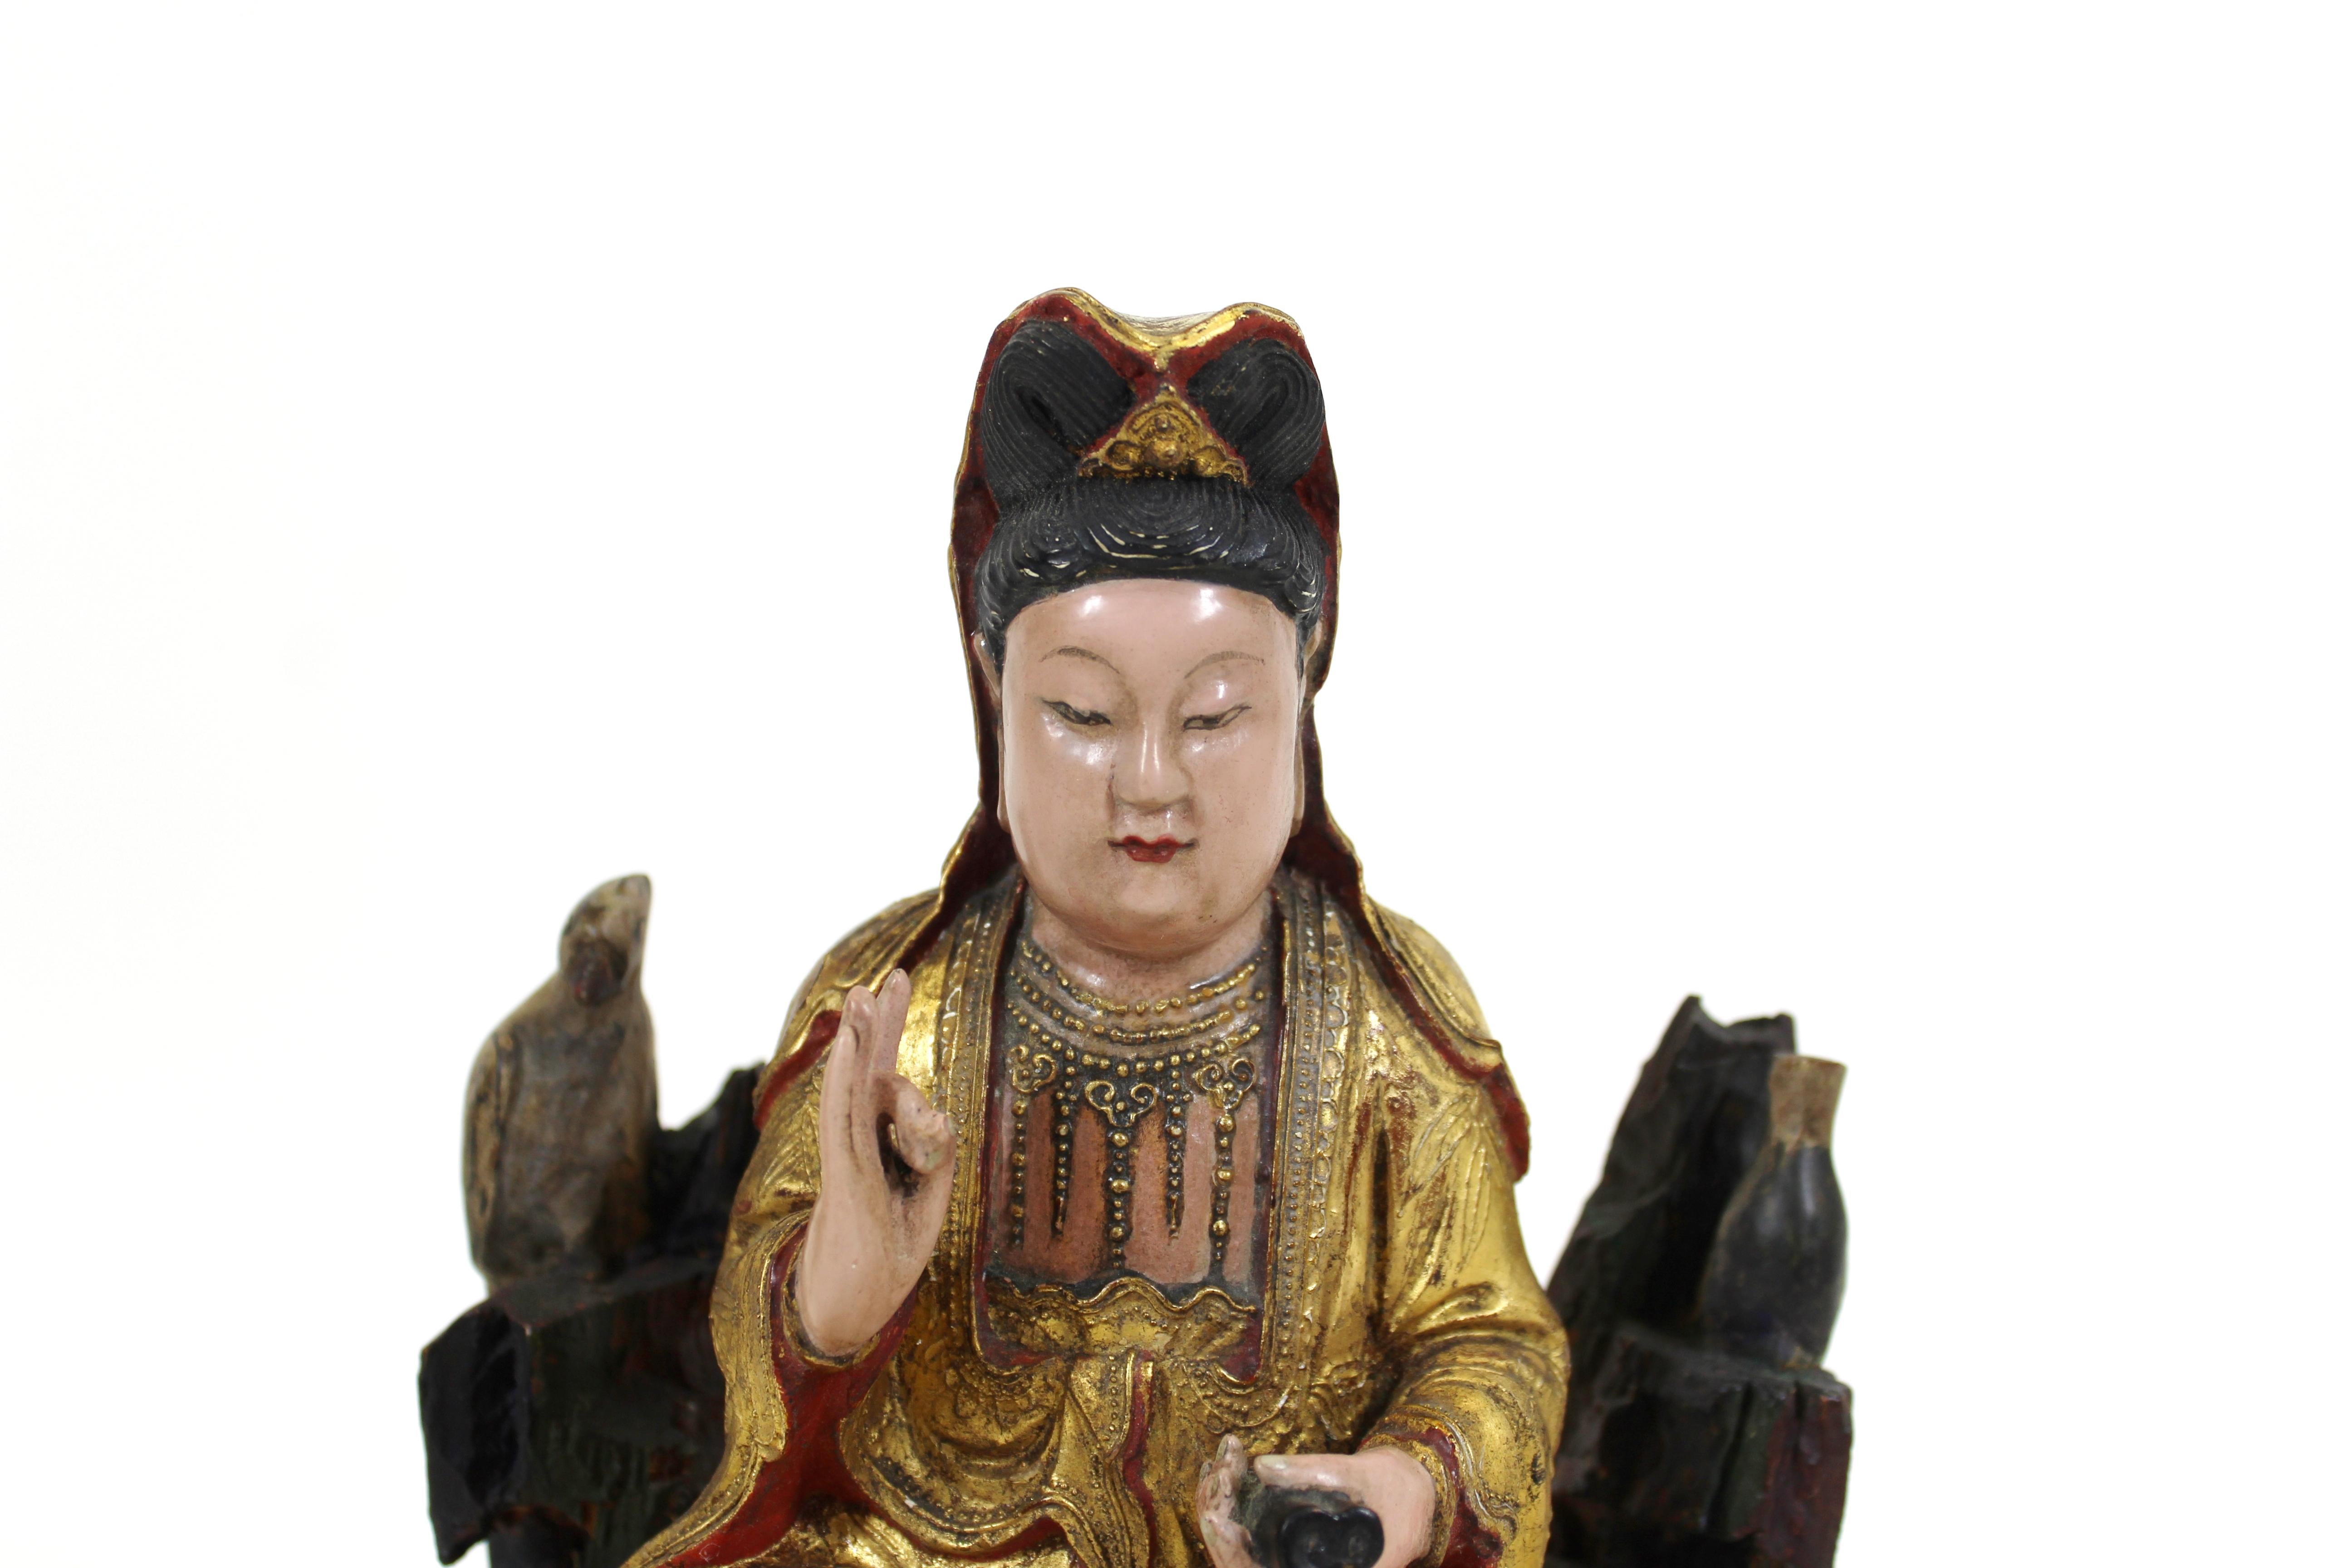 Chinese Qing dynasty goddess Quan Yin carved wood sculpture, polychromed and partially gilt. the piece remains in remarkable antique condition with age-appropriate wear and use.